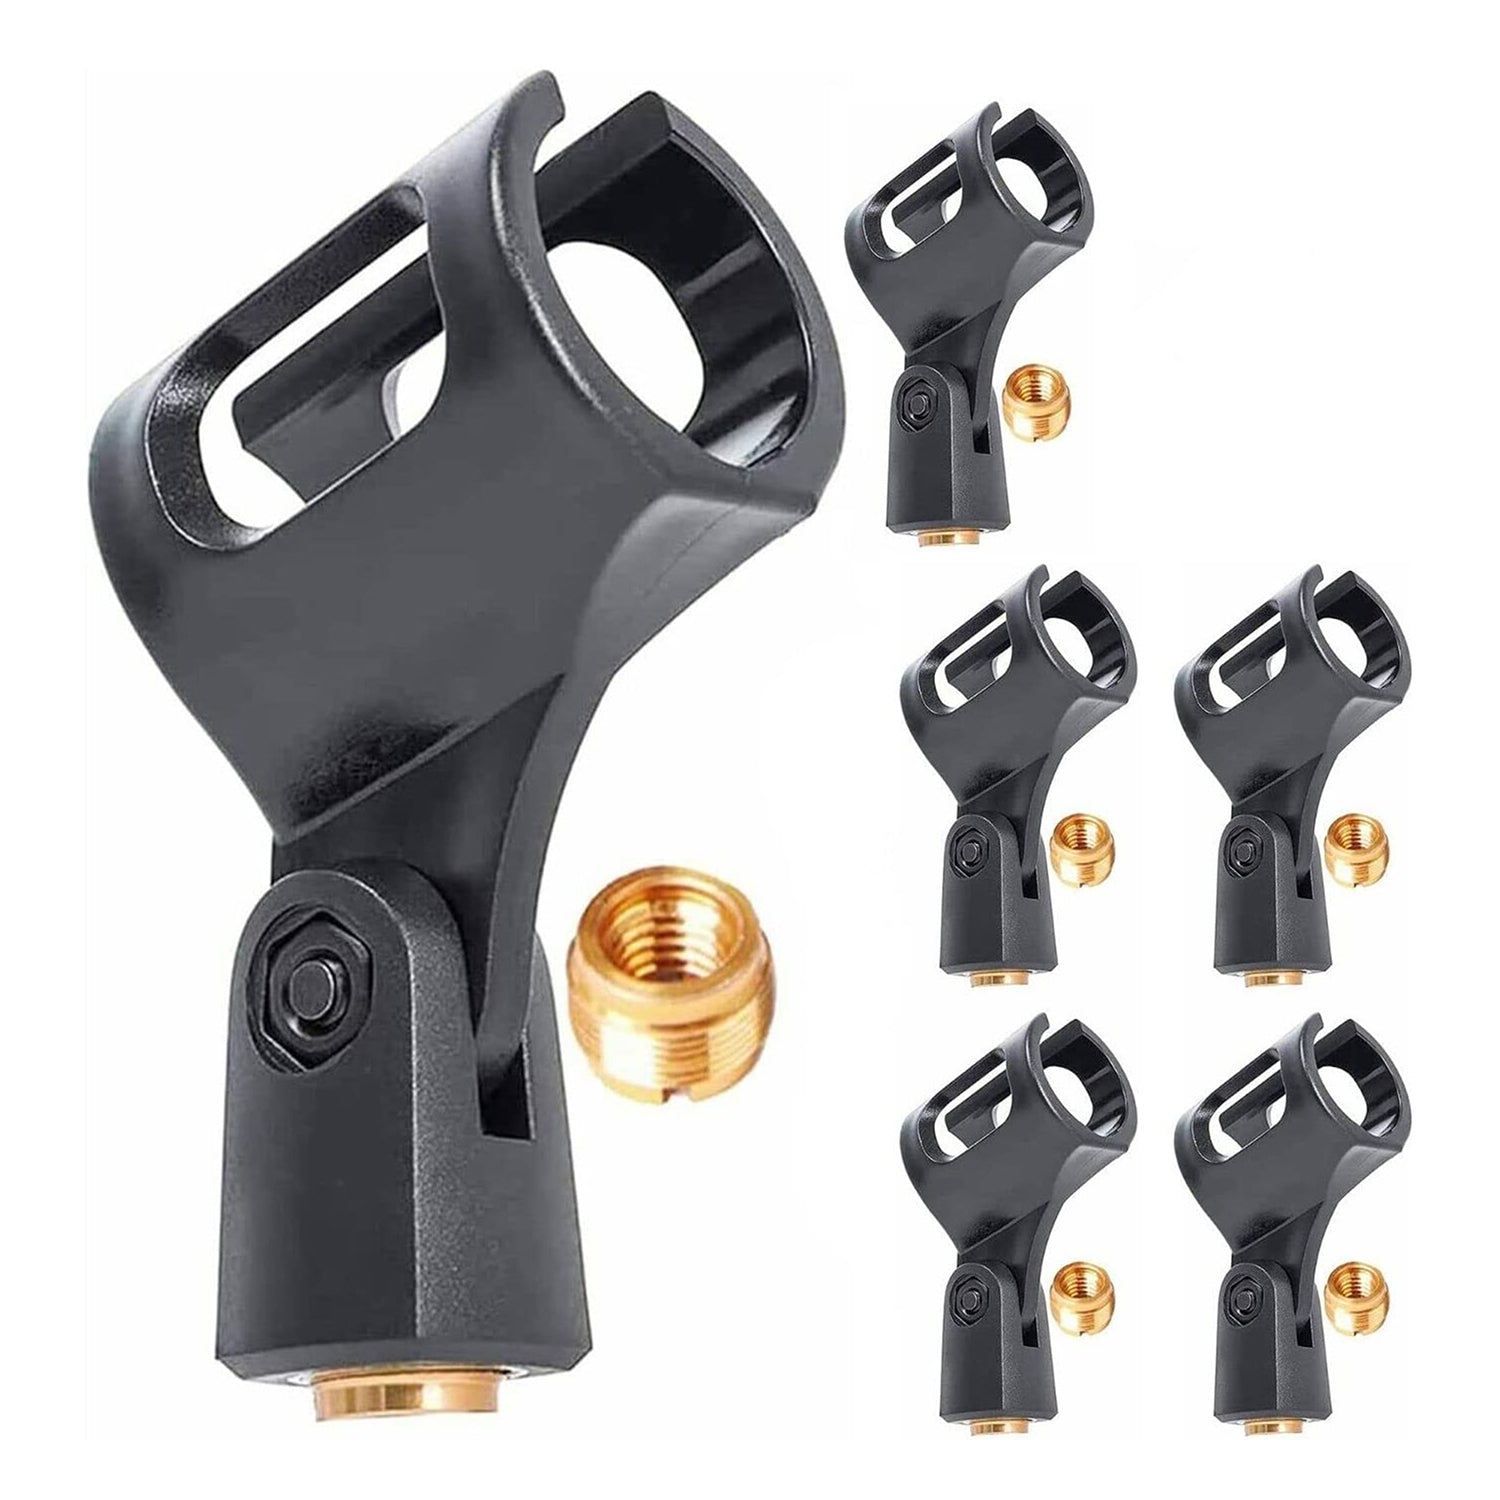 5 Core Universal Microphone Clip Holder 6Pack Mic Mount w Gold Plated 5/8" - 3/8" Screw Adapter